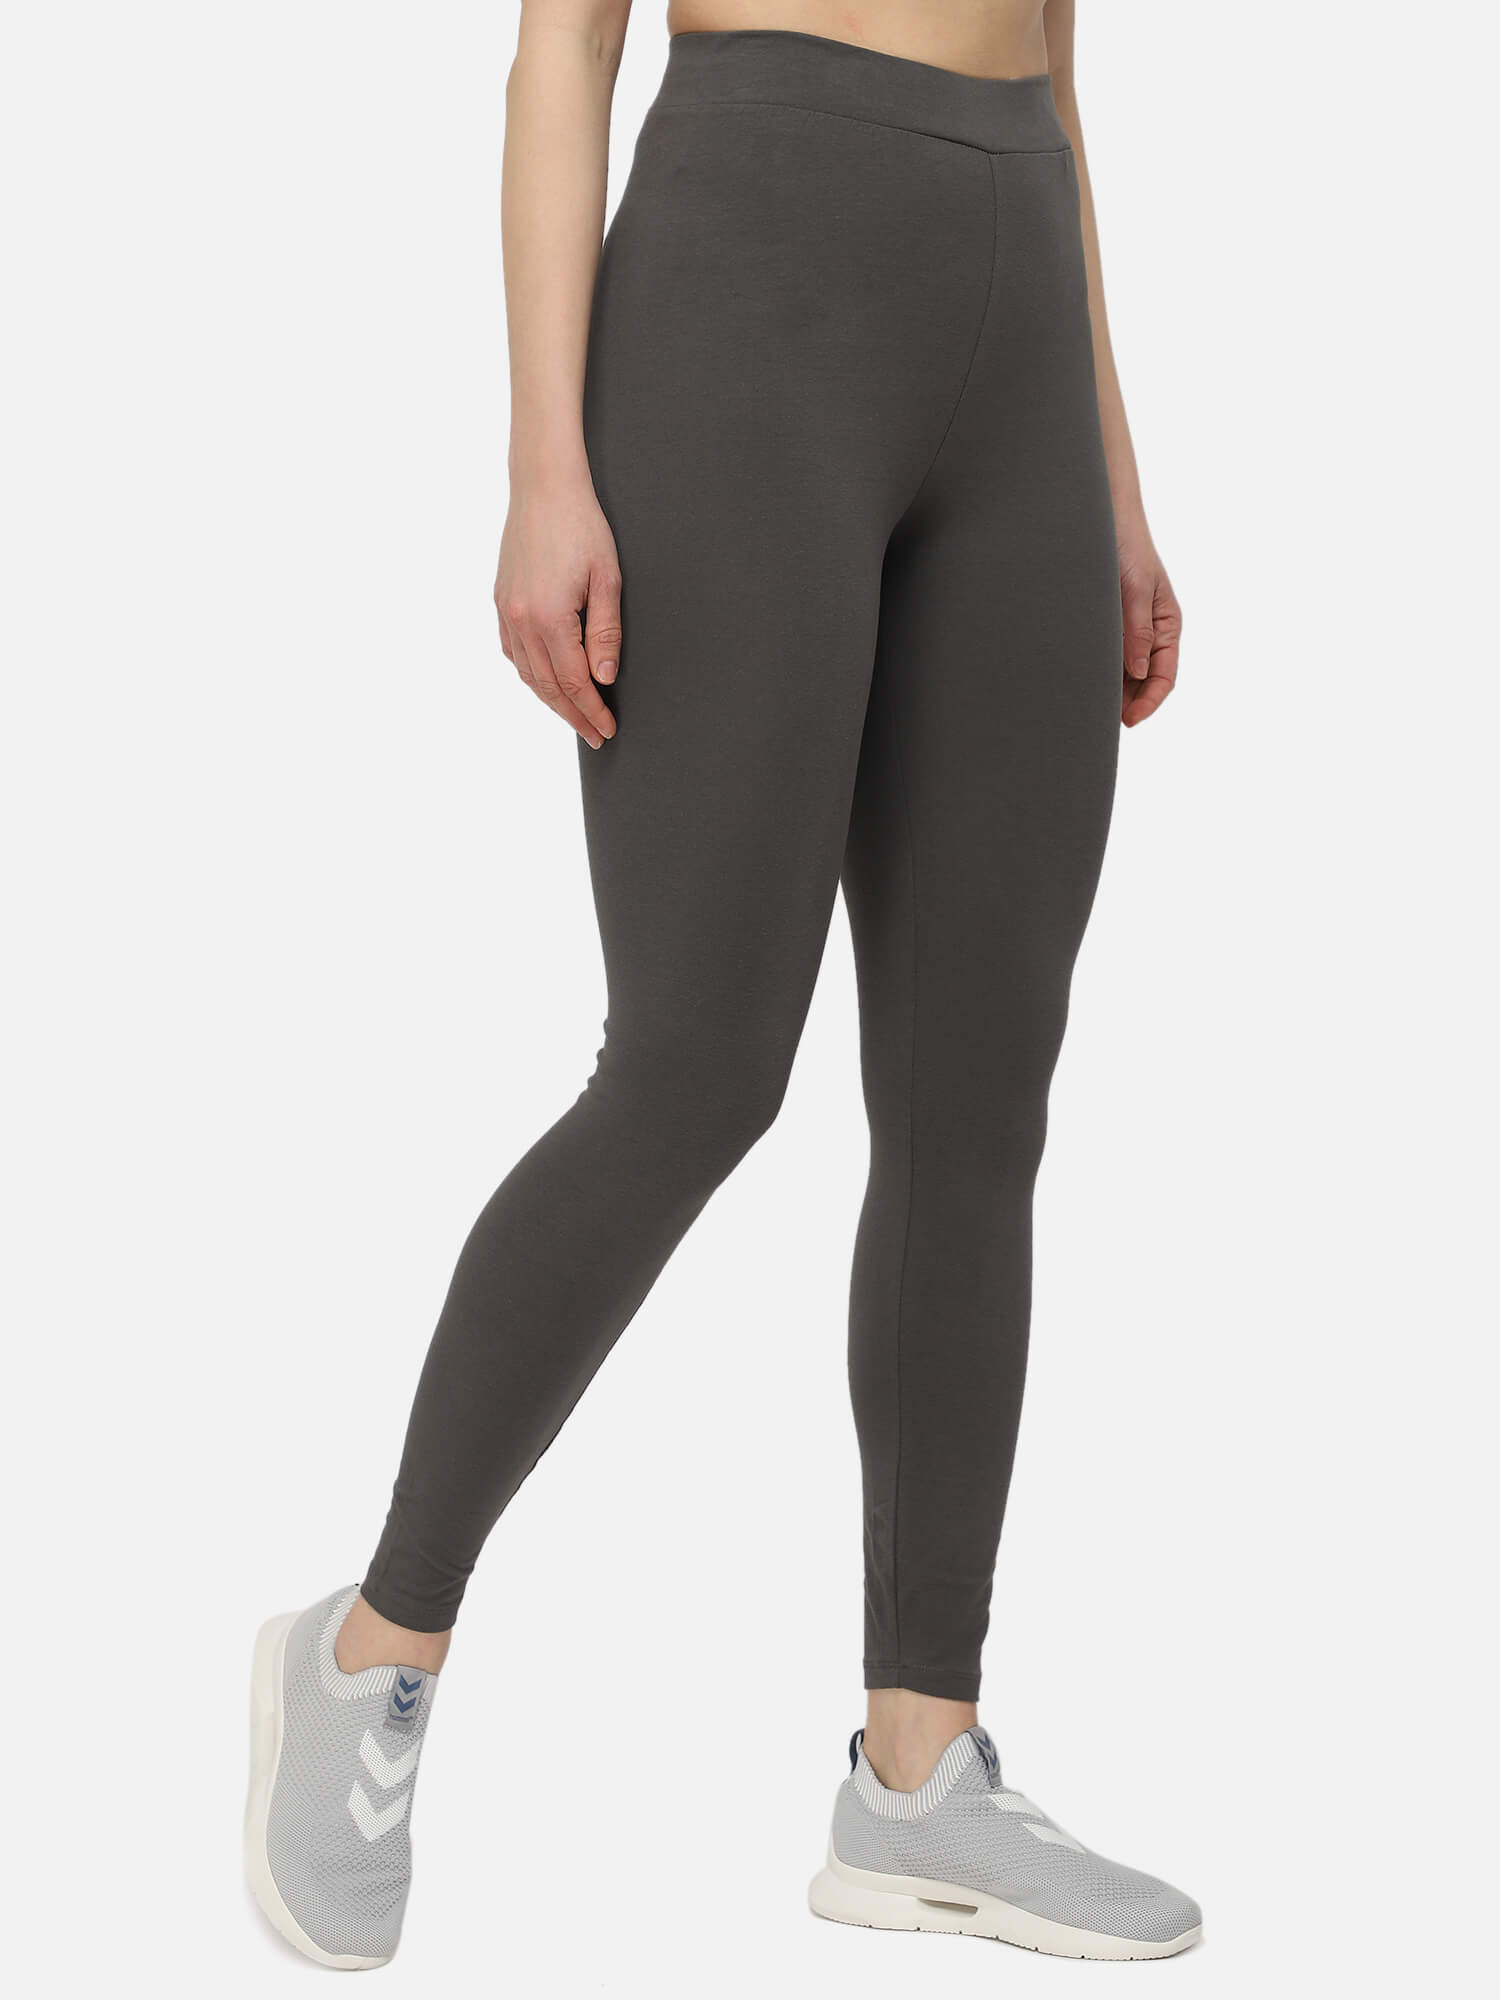 Cate High Waist Grey Tights for Women